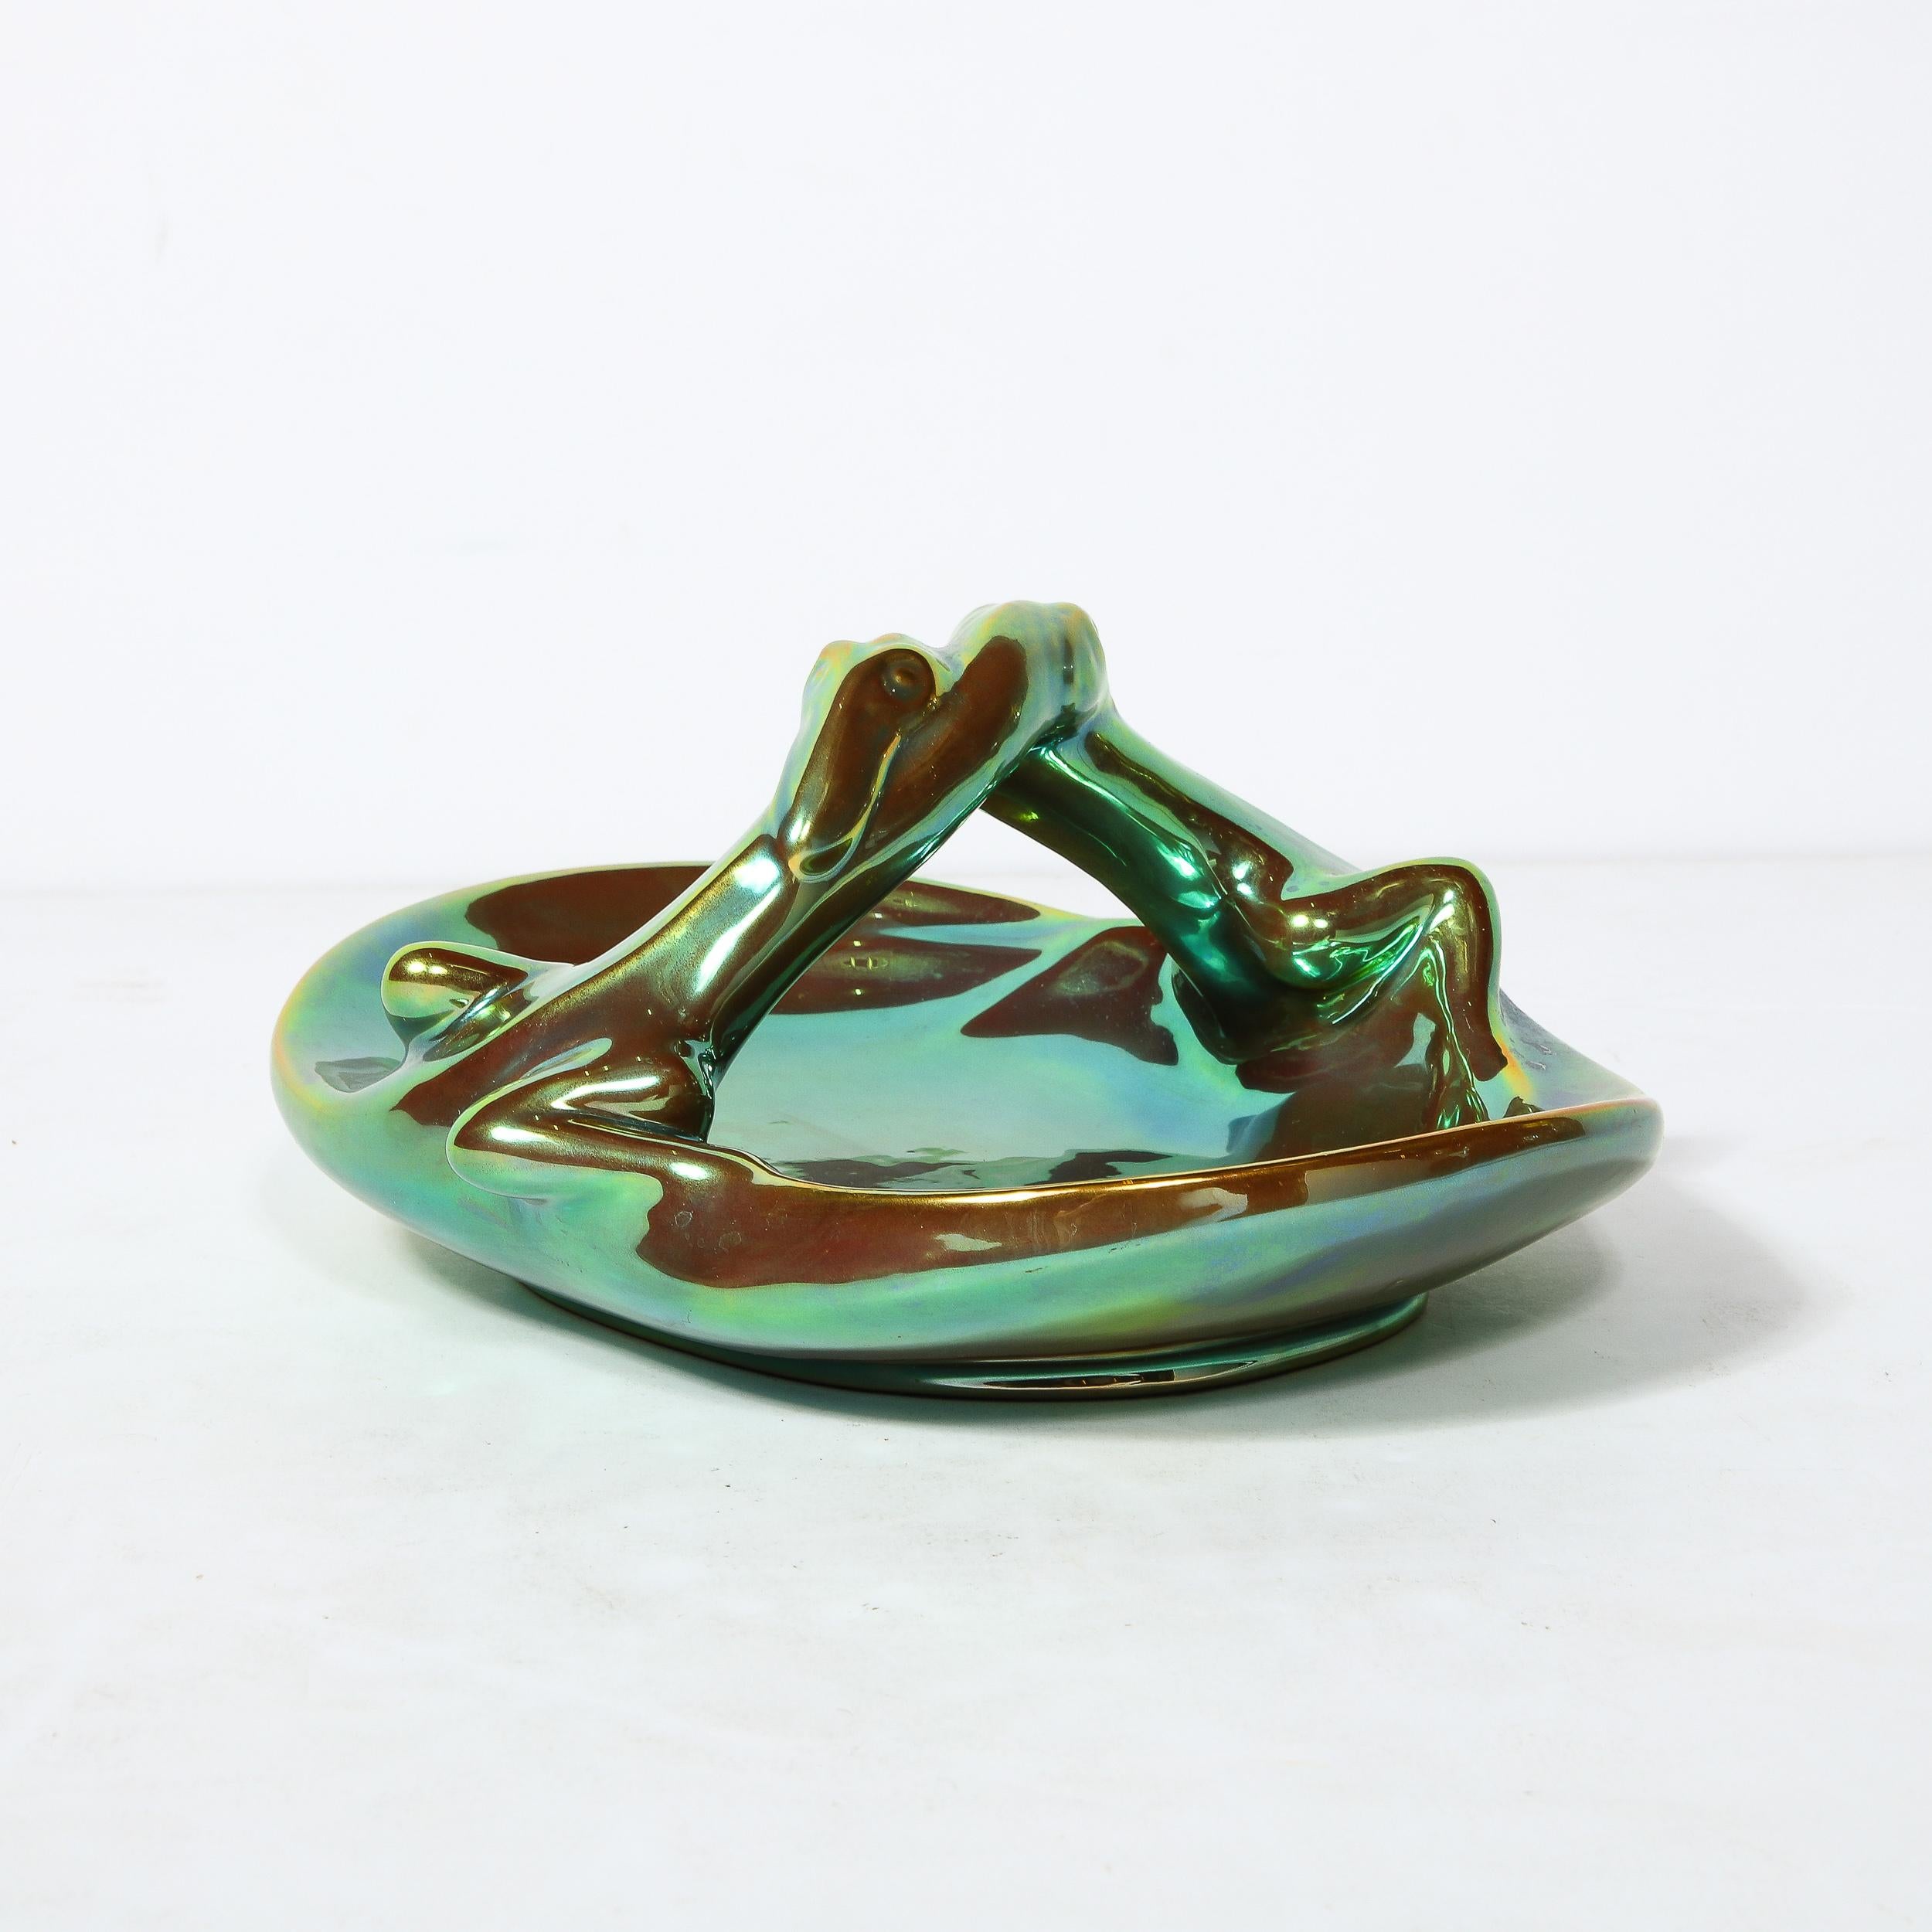 Art Deco Basket Form Ceramic Dish of Entwined Lizards by Zsolnay Eosin In Excellent Condition For Sale In New York, NY